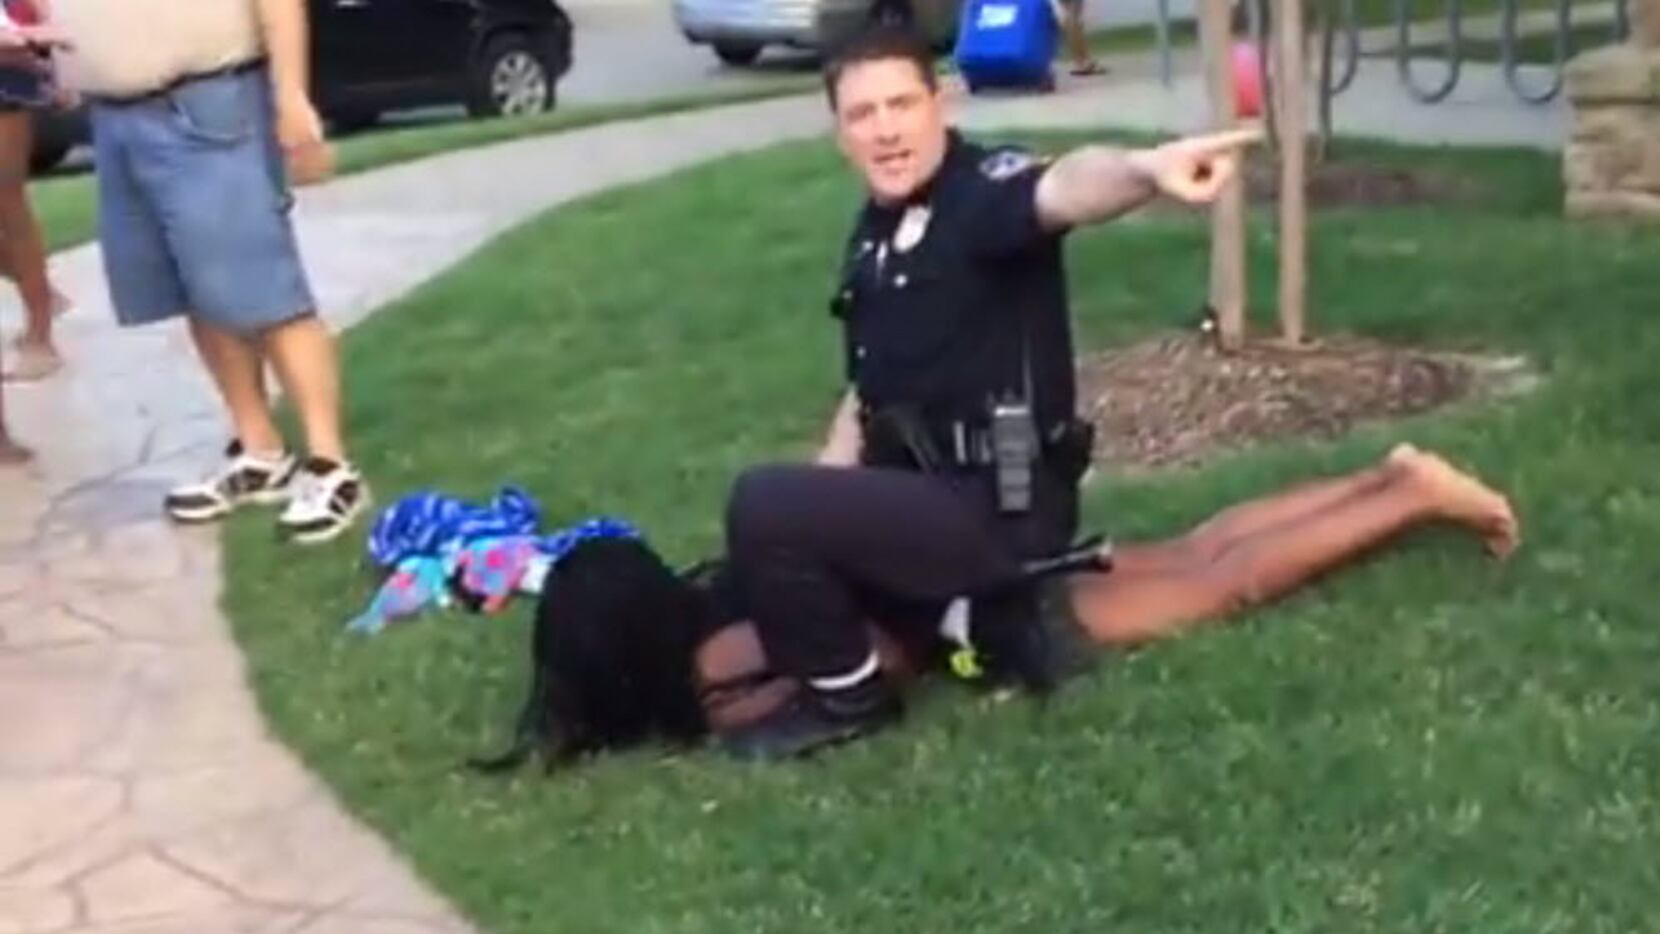 McKinney police Cpl. Eric Casebolt warned others away as he handcuffed a teenage girl...